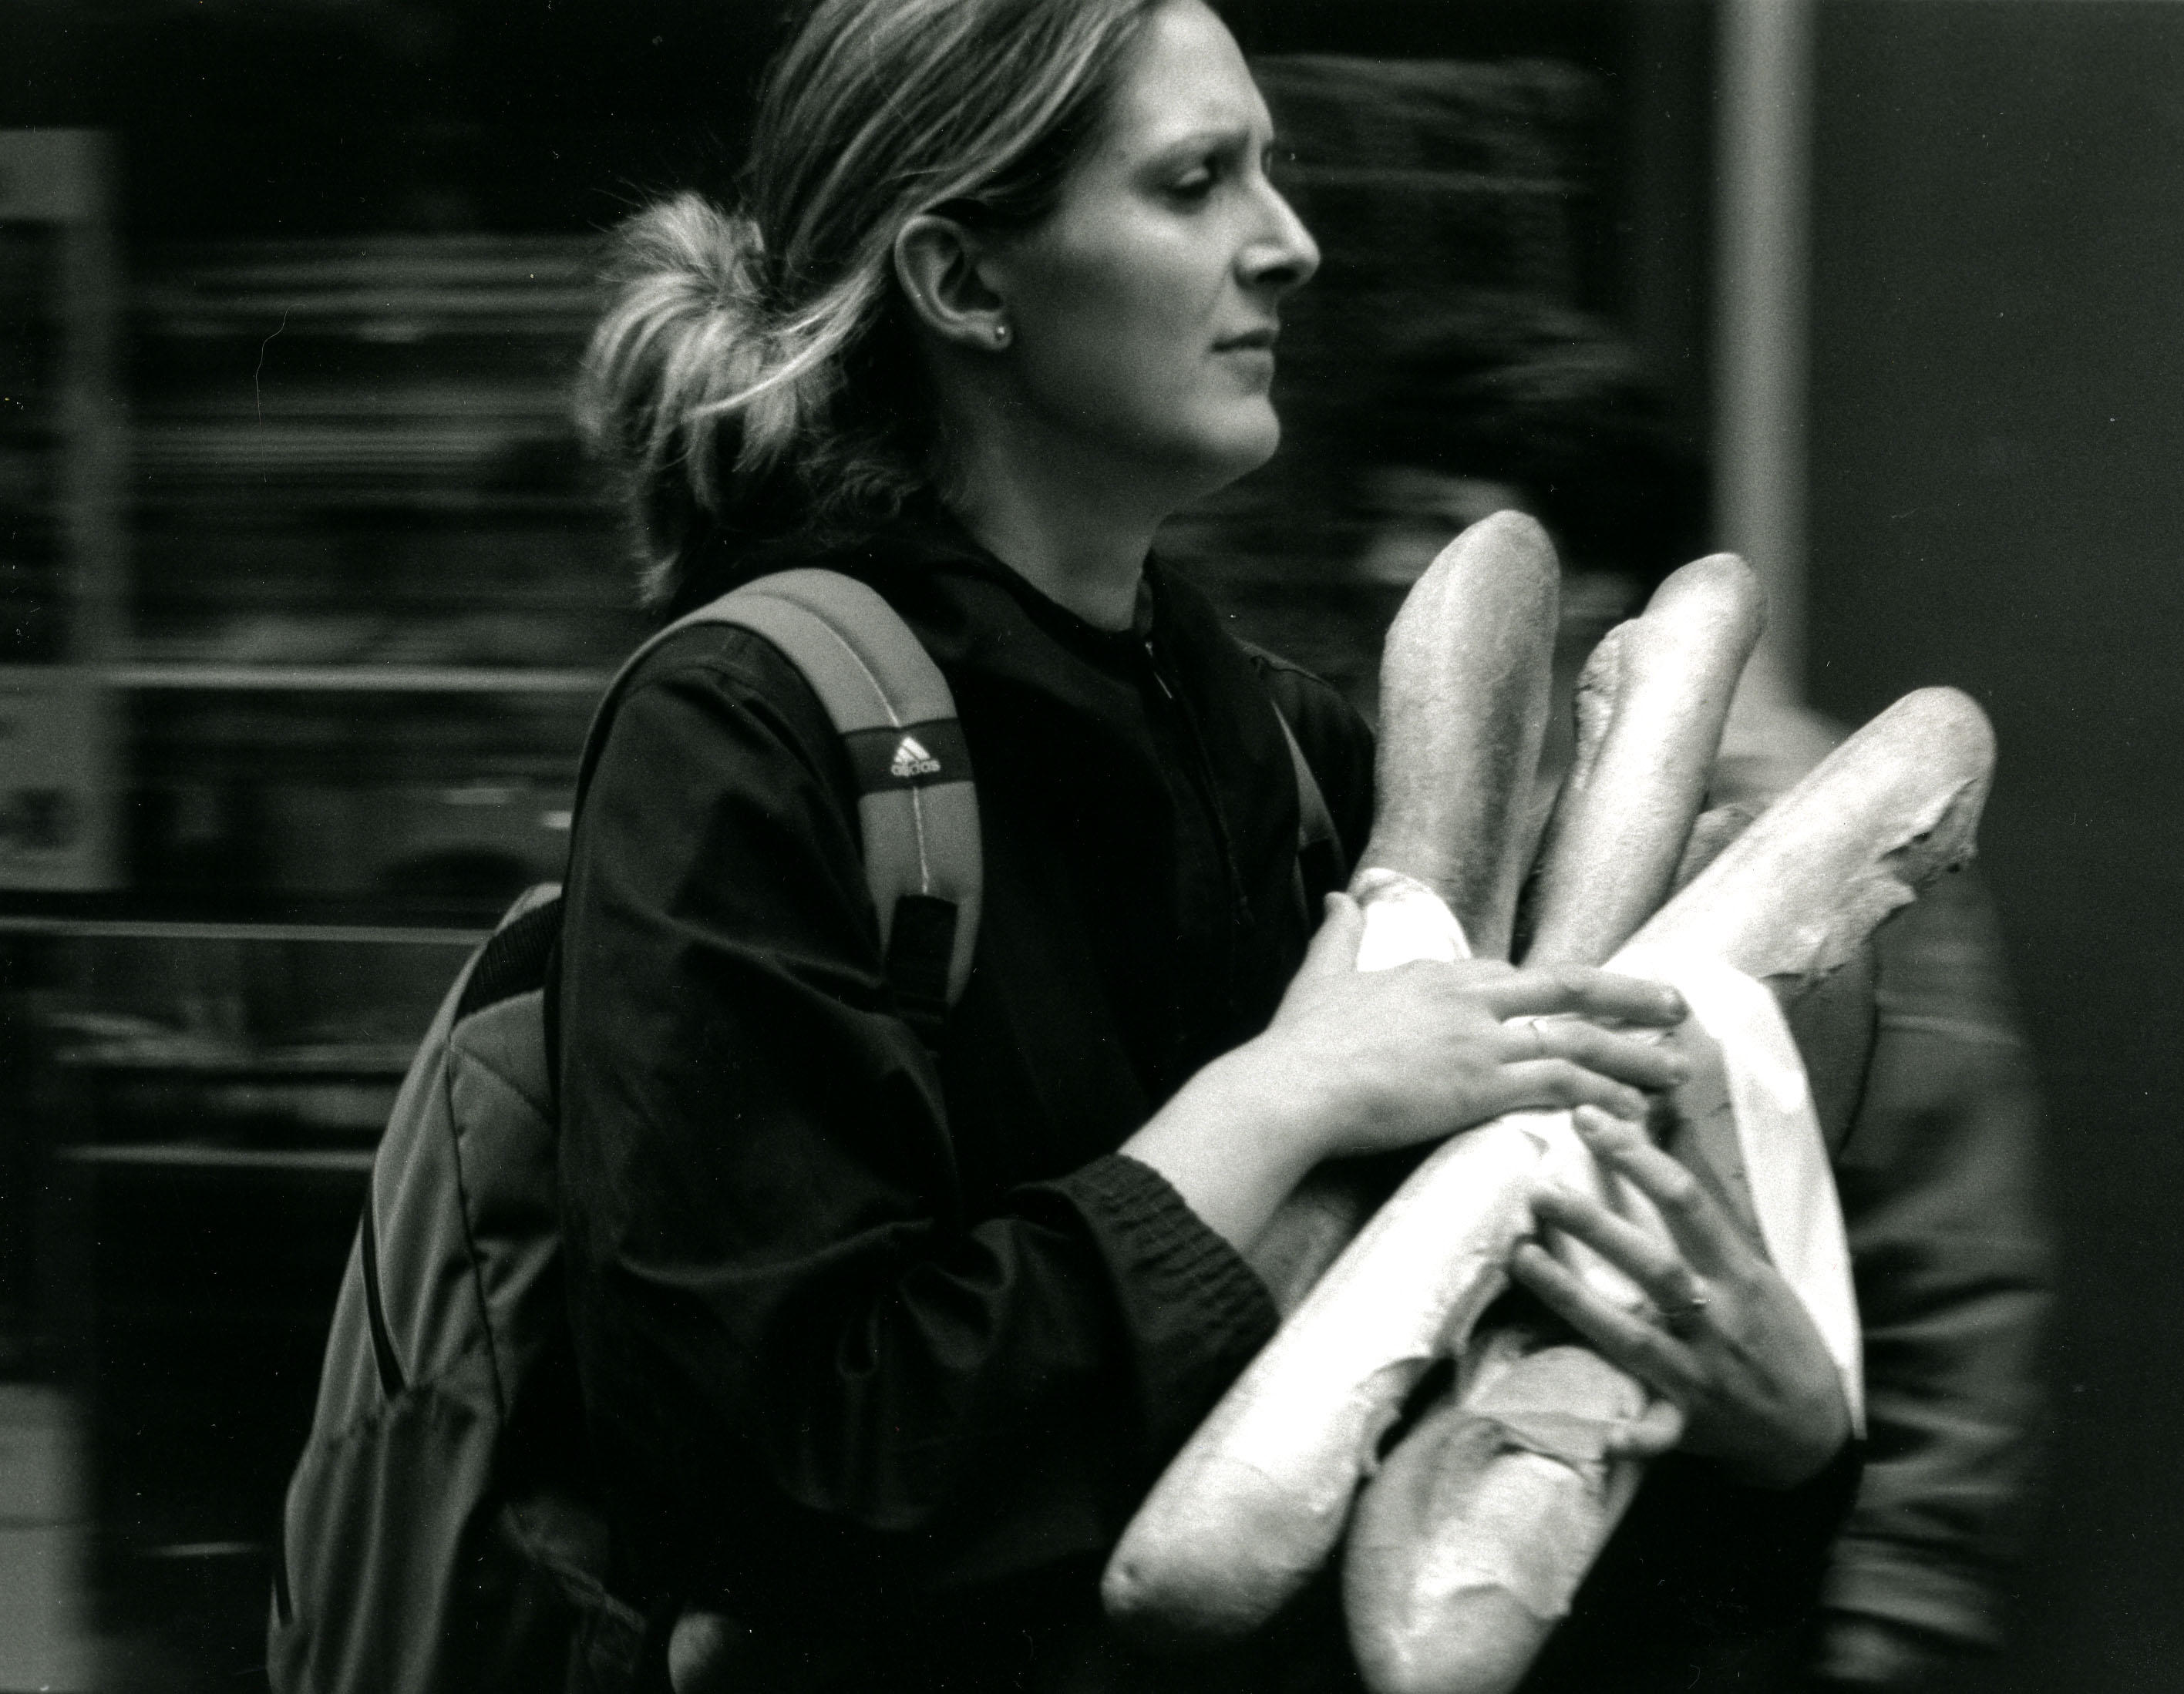 French Woman Carrying Bread, France 2005